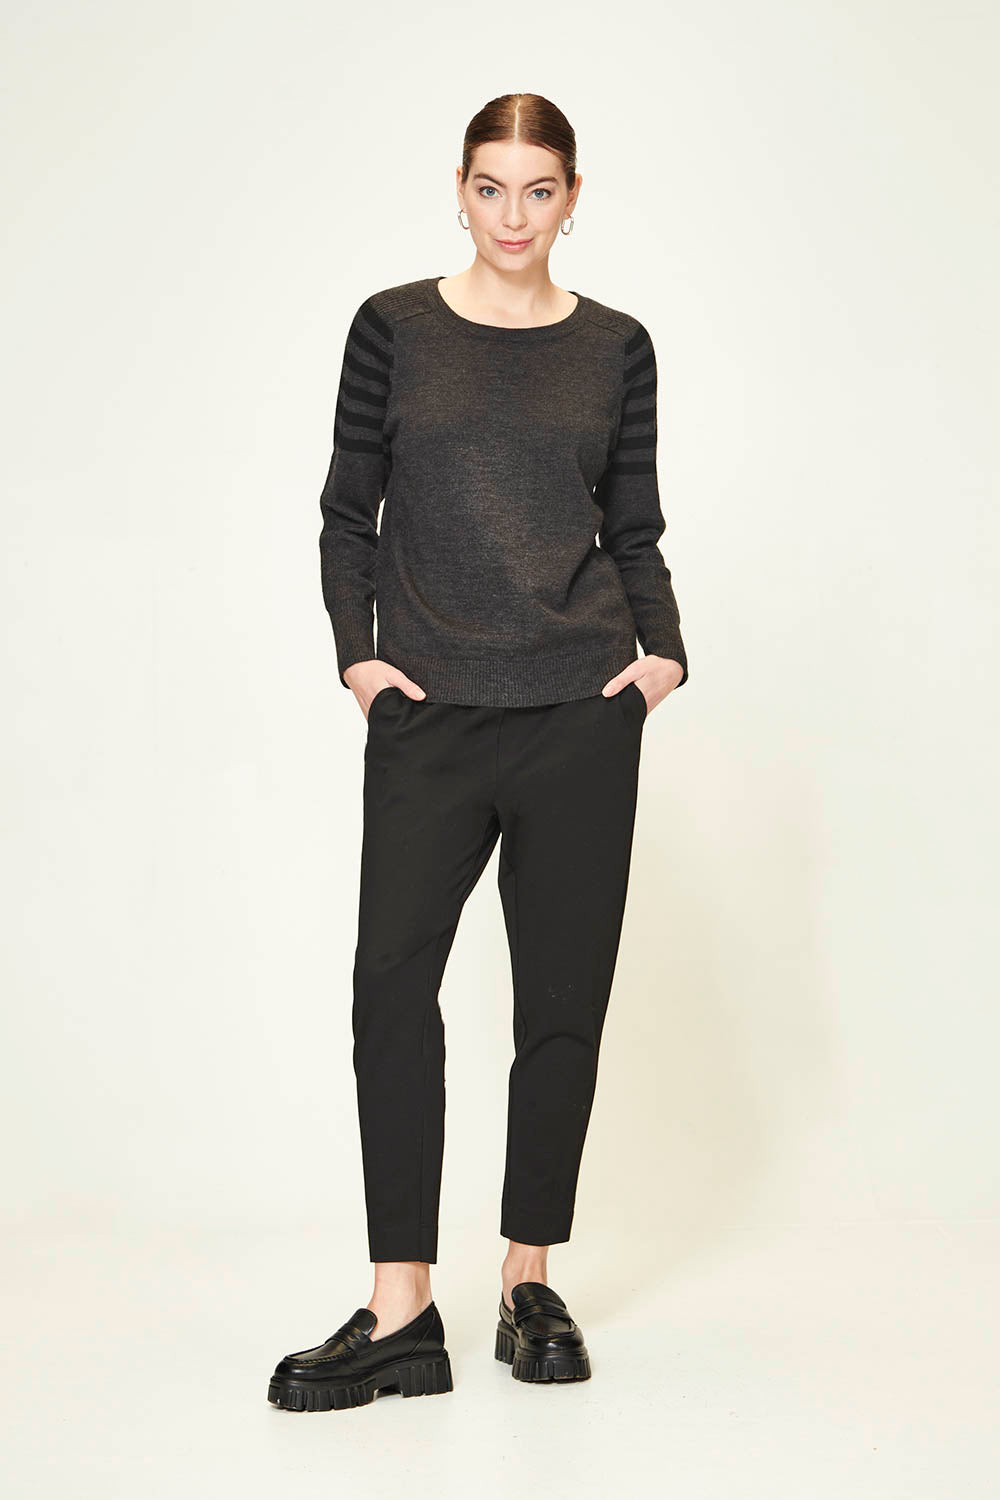 Flynn Sweater - Charcoal Marle